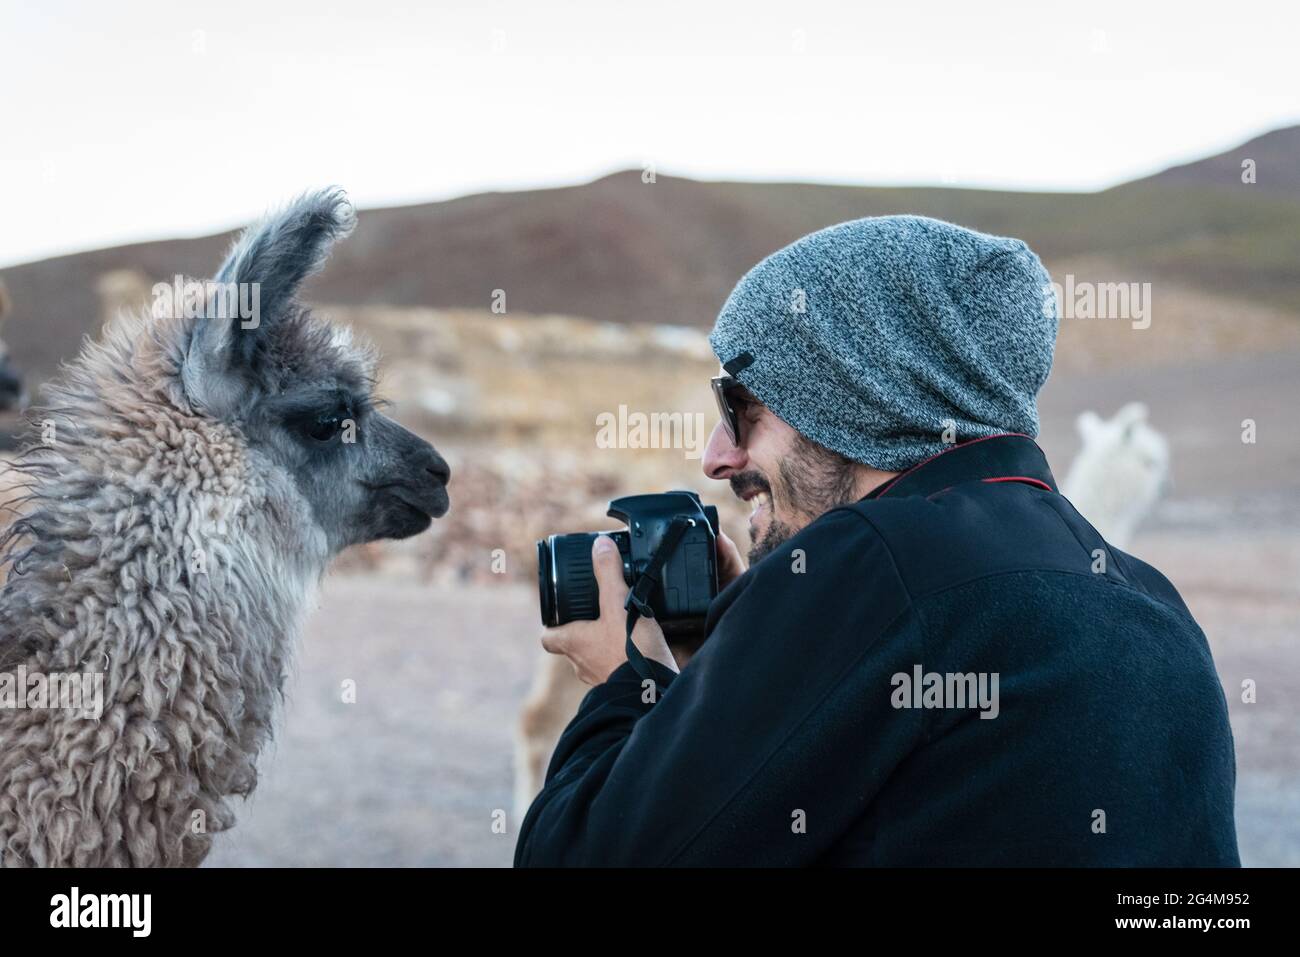 A young man with his camera looks face to face with a llama while traveling in the in the Andean mountains, in Bolivia. Stock Photo